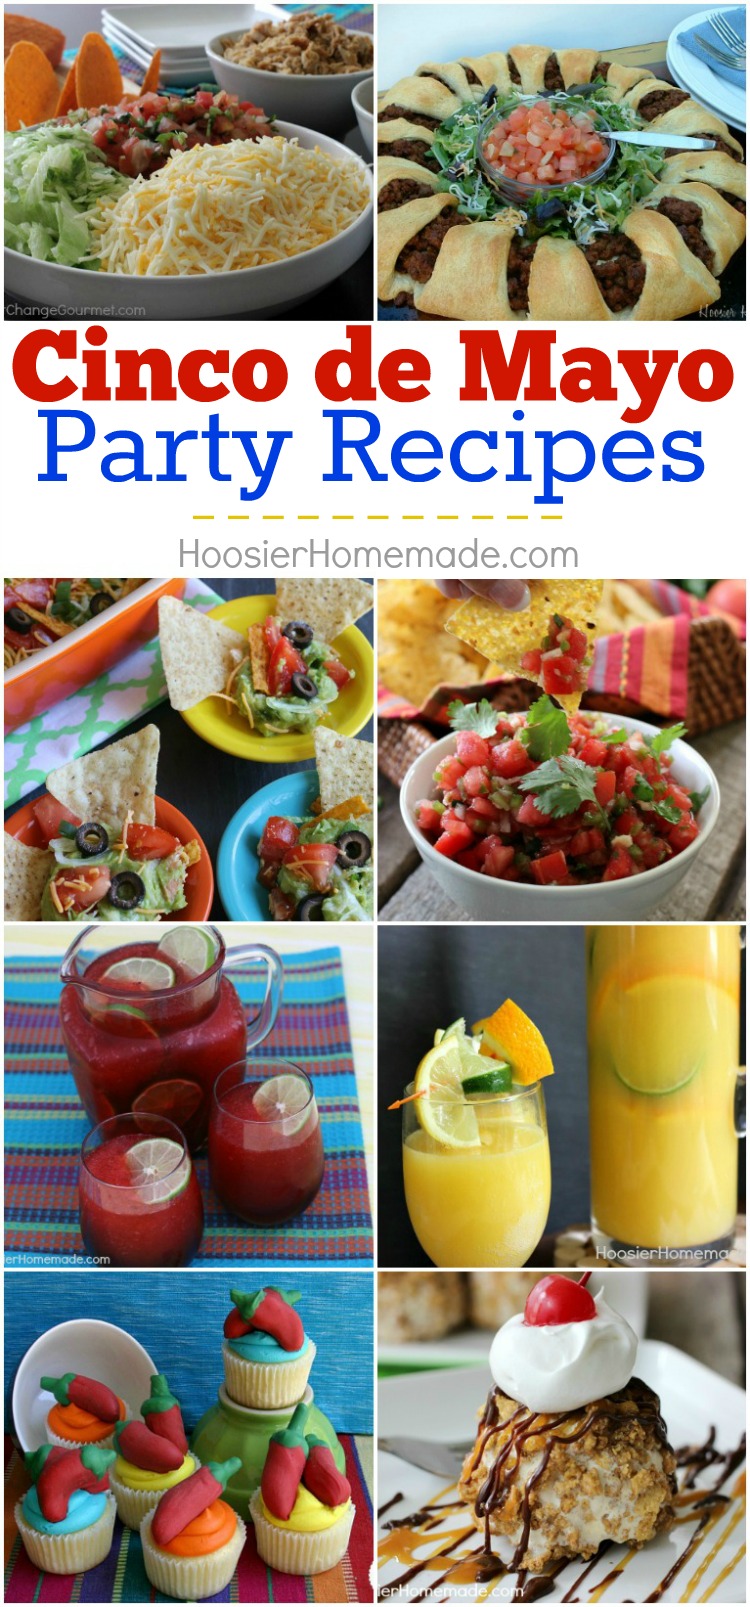 Are you ready to celebrate? These Cinco de Mayo Recipes are sure to please guests! Main Dishes, Sides, Snacks, Drinks and of course Dessert too! Be sure to save the recipes by pinning to your Party Board!